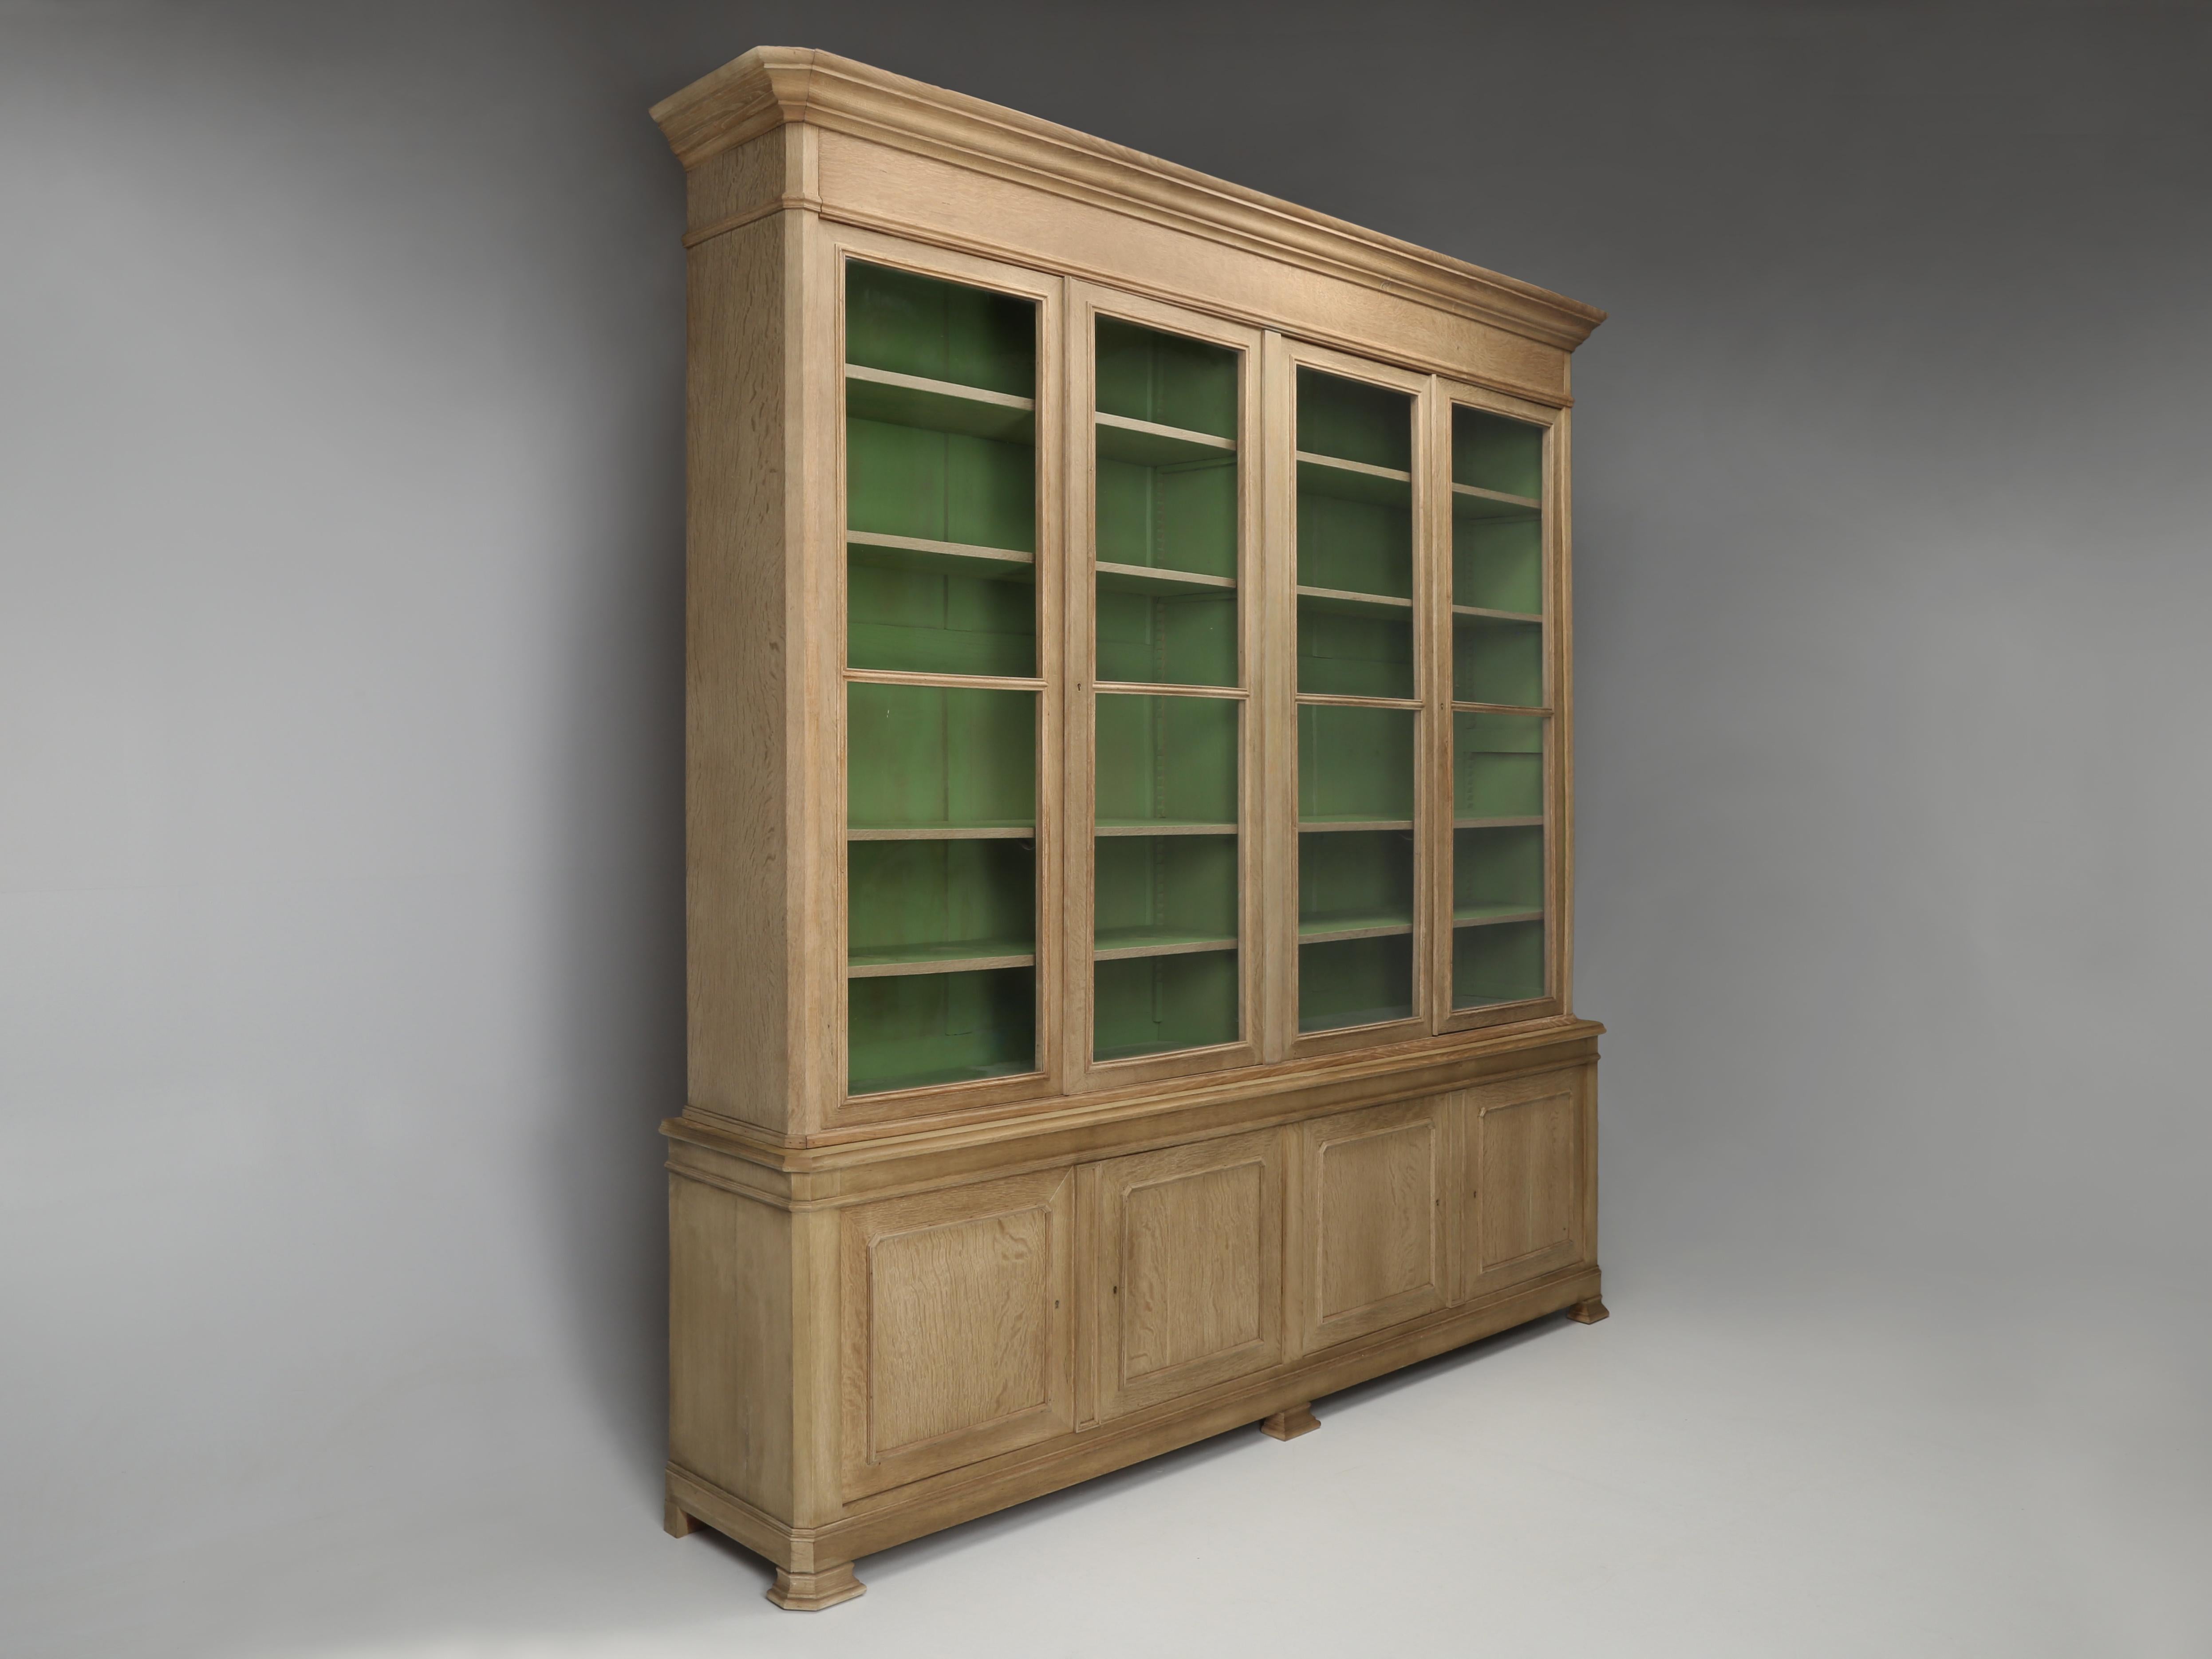 Antique French Bibliothèque, or antique French bookcase was constructed in the style referred to as Louis Philippe (King Louis Philippe I 1830–1848). Our Antique Louis Philippe French Bookcase was built in the first French decorative style imposed